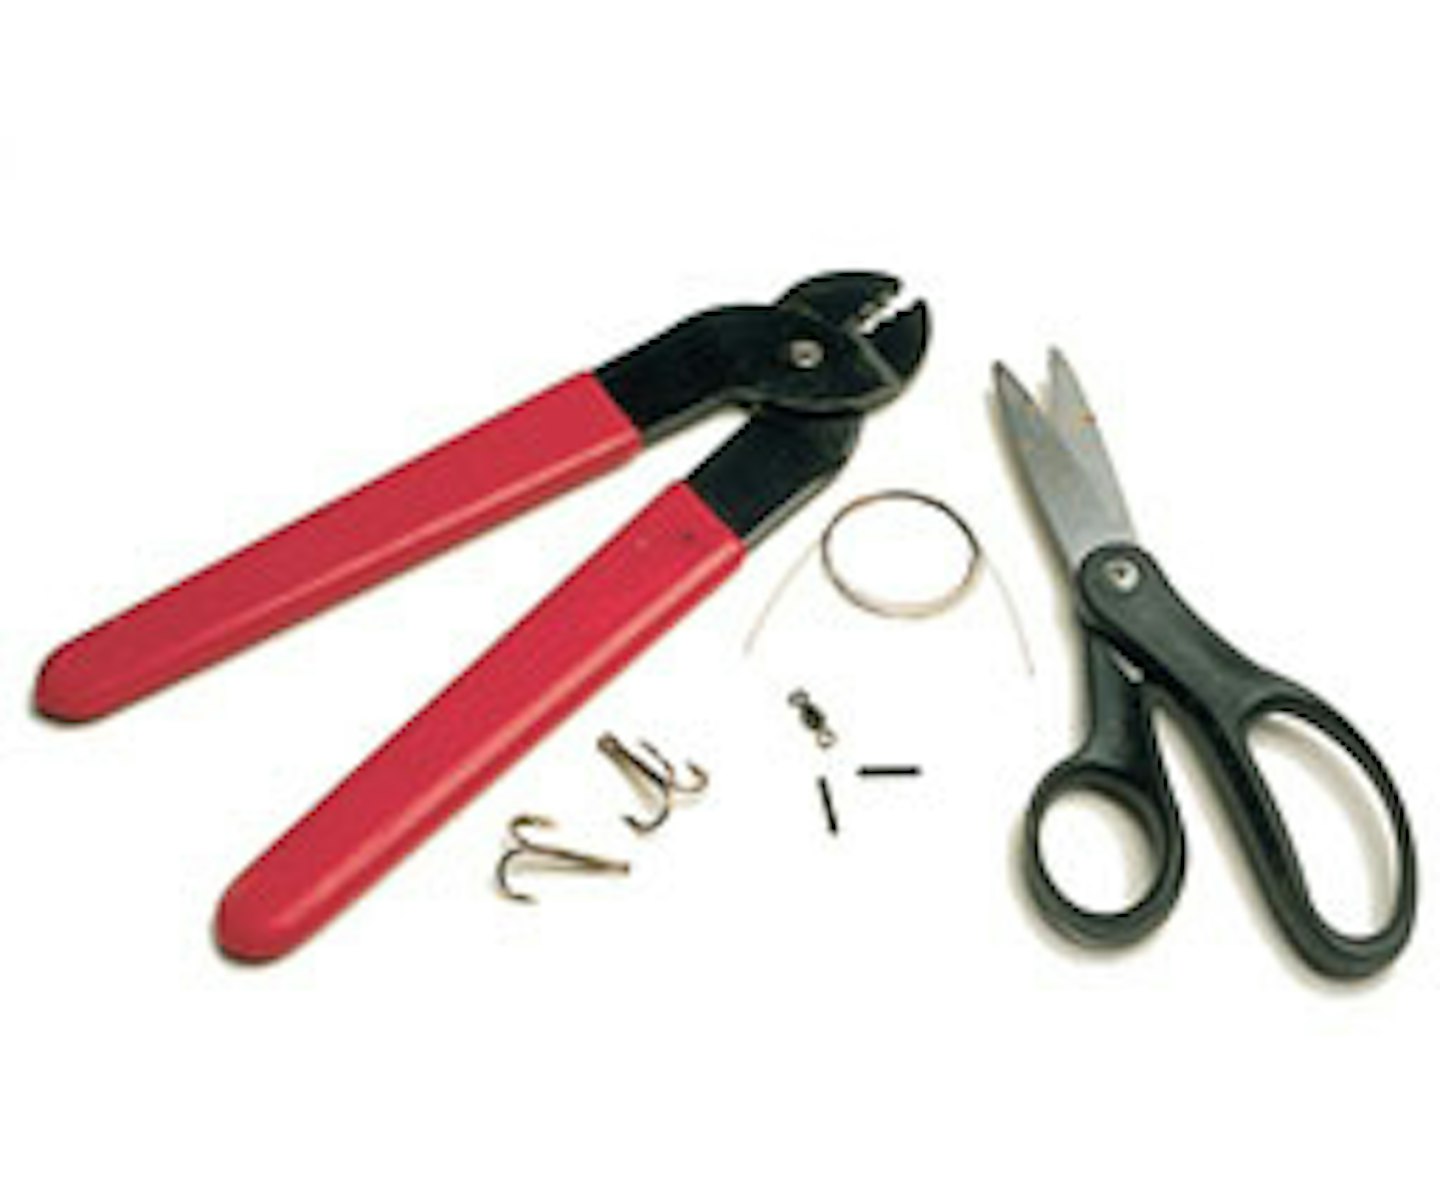 1. You will need some wire, two treble hooks, a swivel, some crimps, crimping pliers and sharp wire cutters.